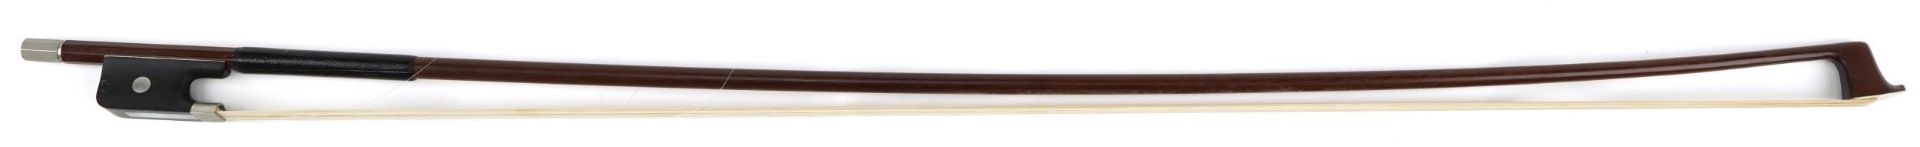 Wooden violin bow with mother of pearl frog impressed Erich Steiner, 74.5cm in length - Image 3 of 6